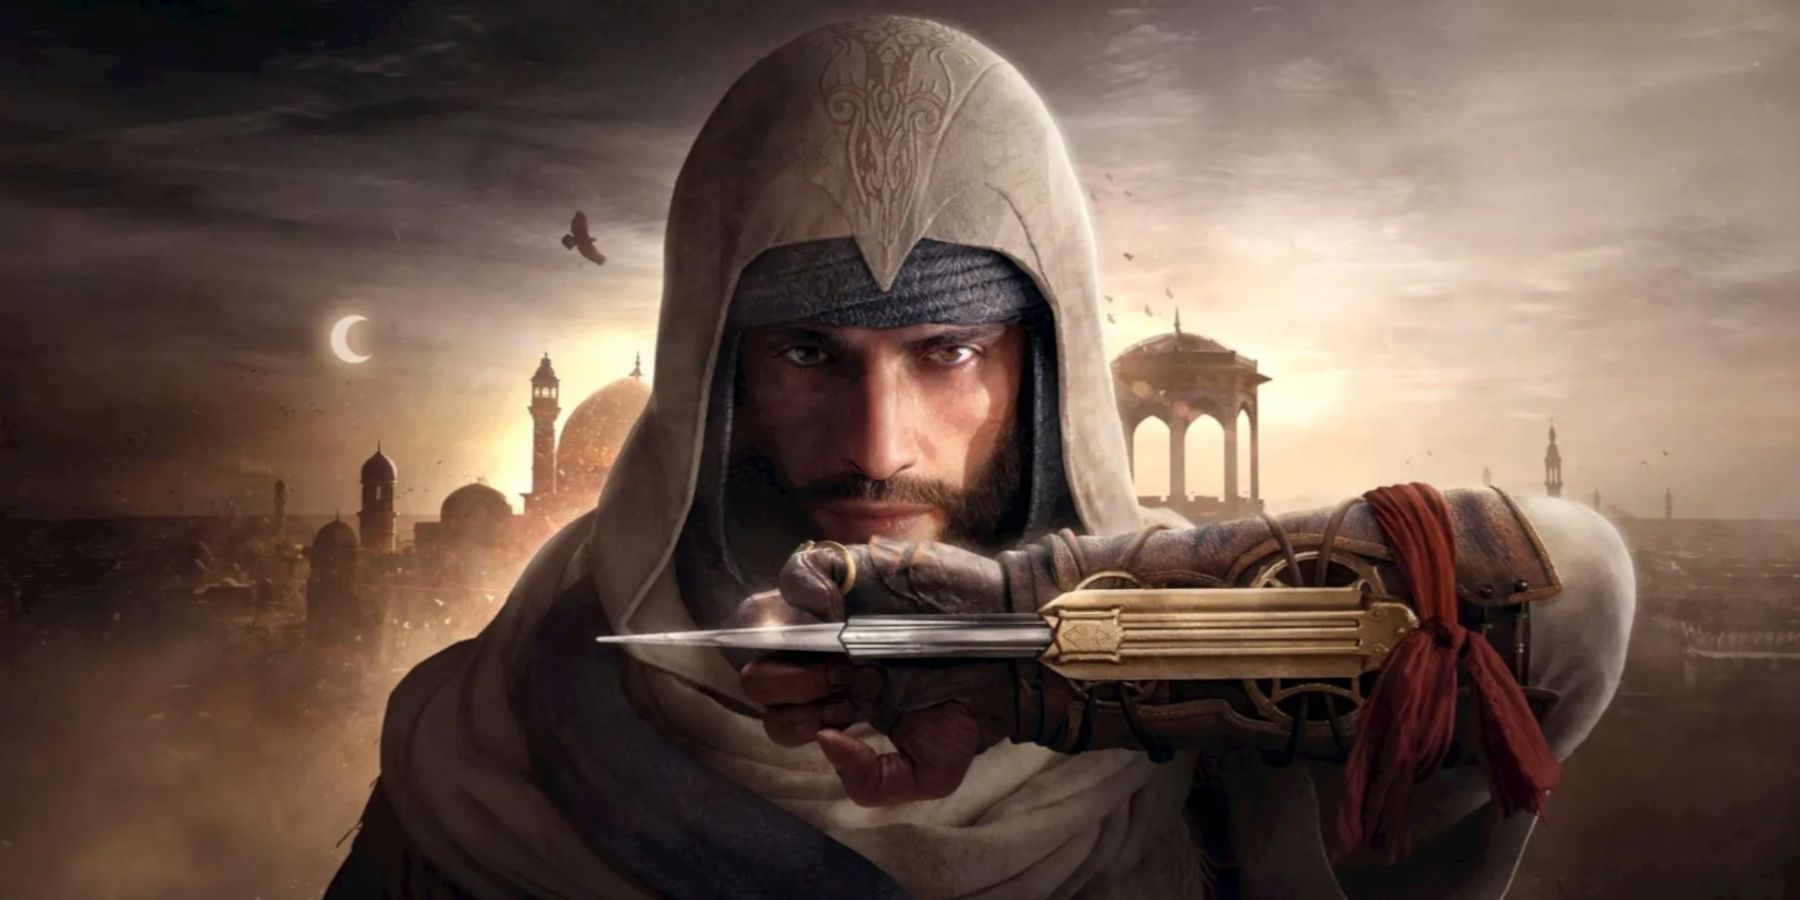 Basim with the hidden blade and city of Baghdad in the background